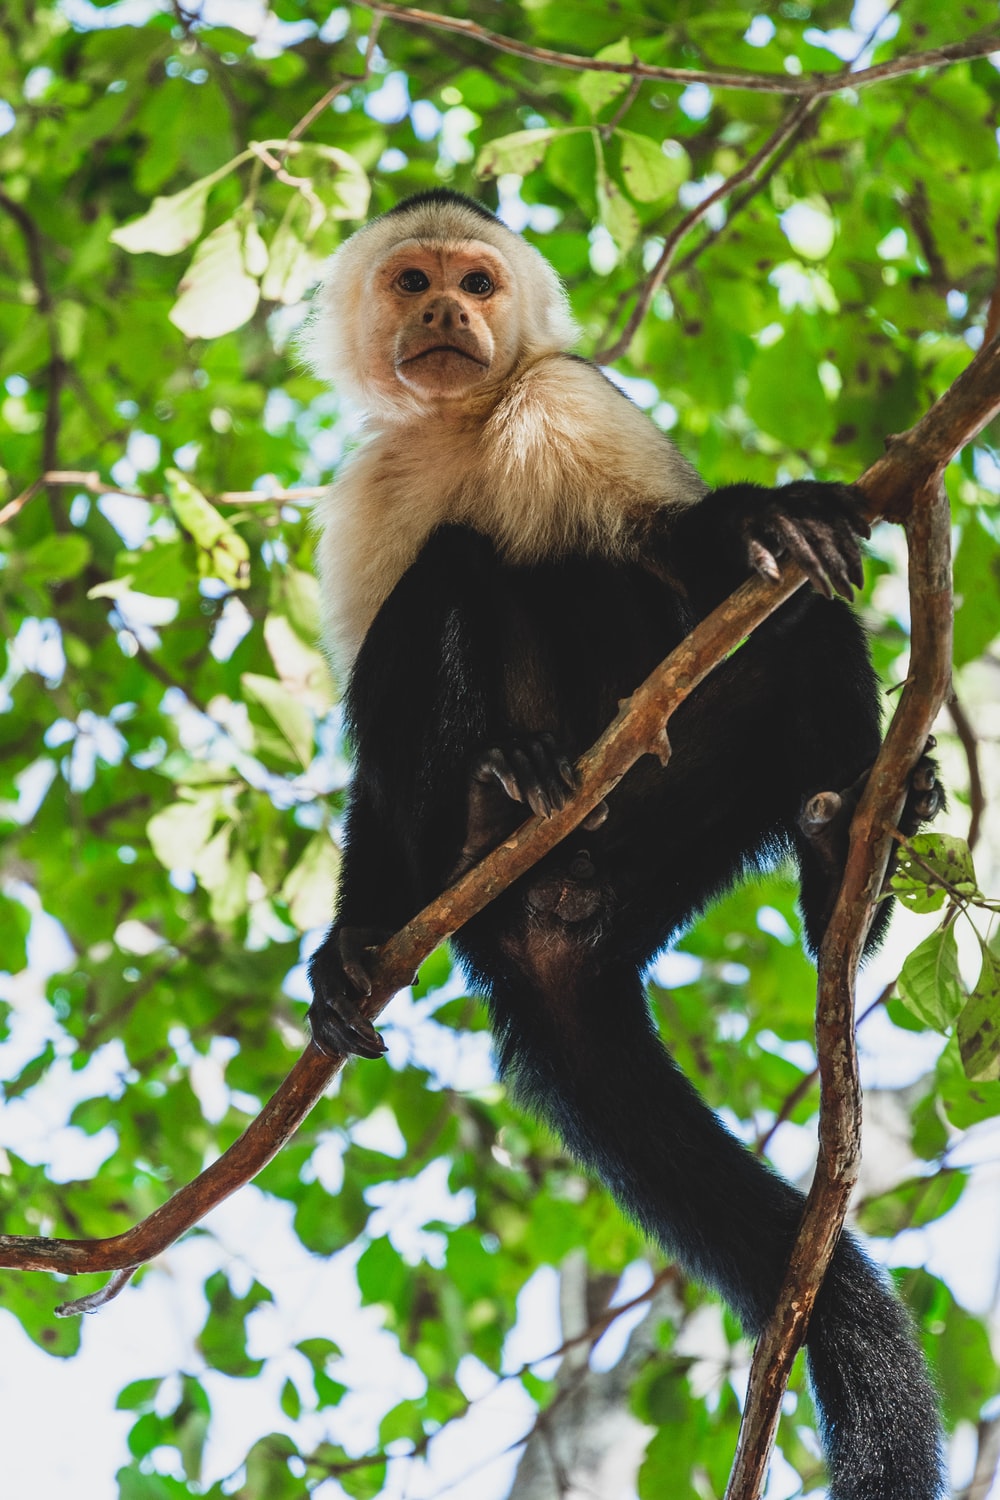 black and white monkey on tree branch during daytime photo